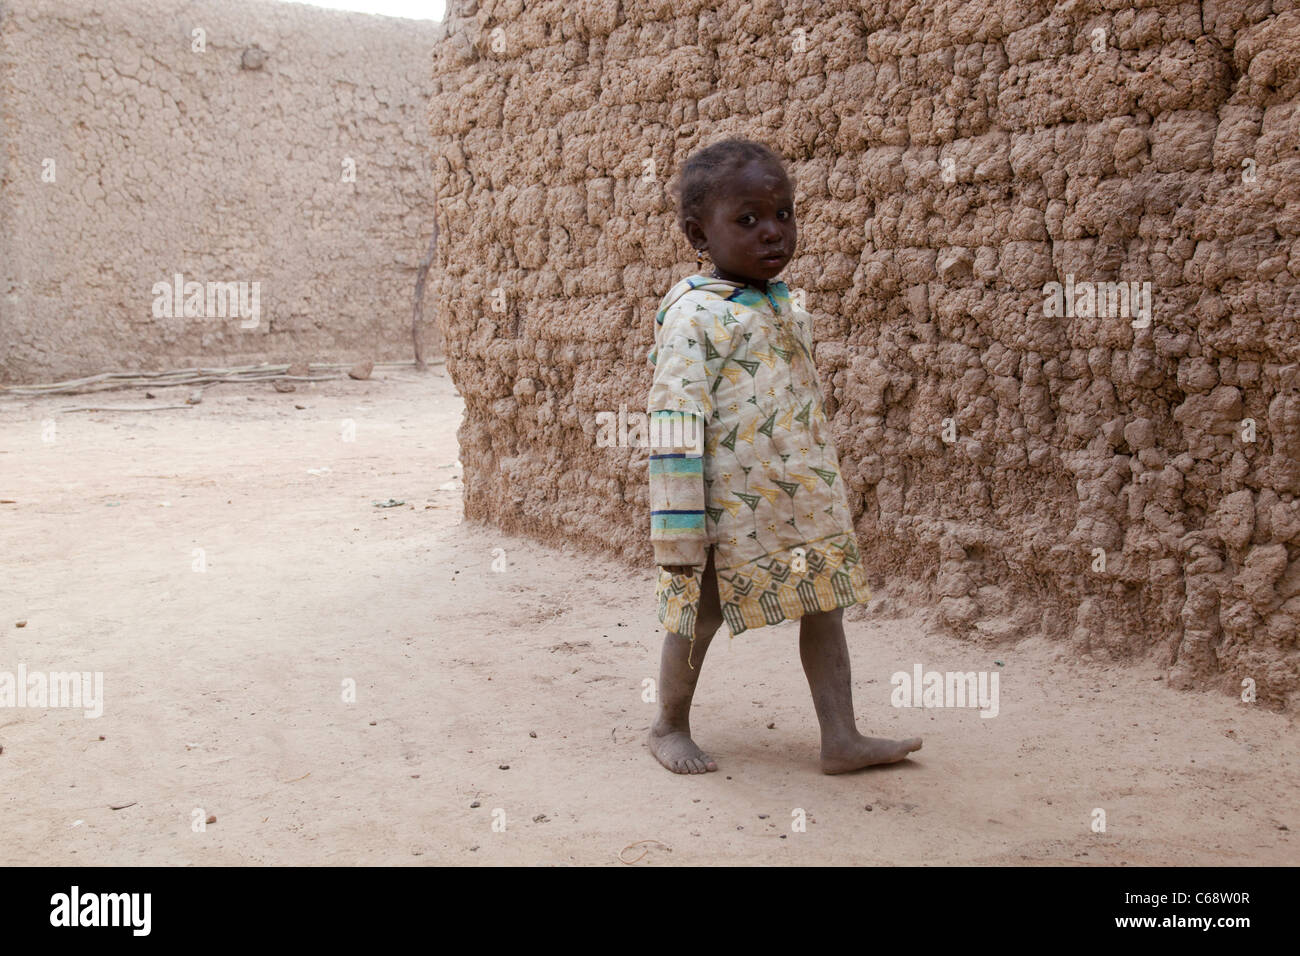 A child in Mali West Africa Stock Photo